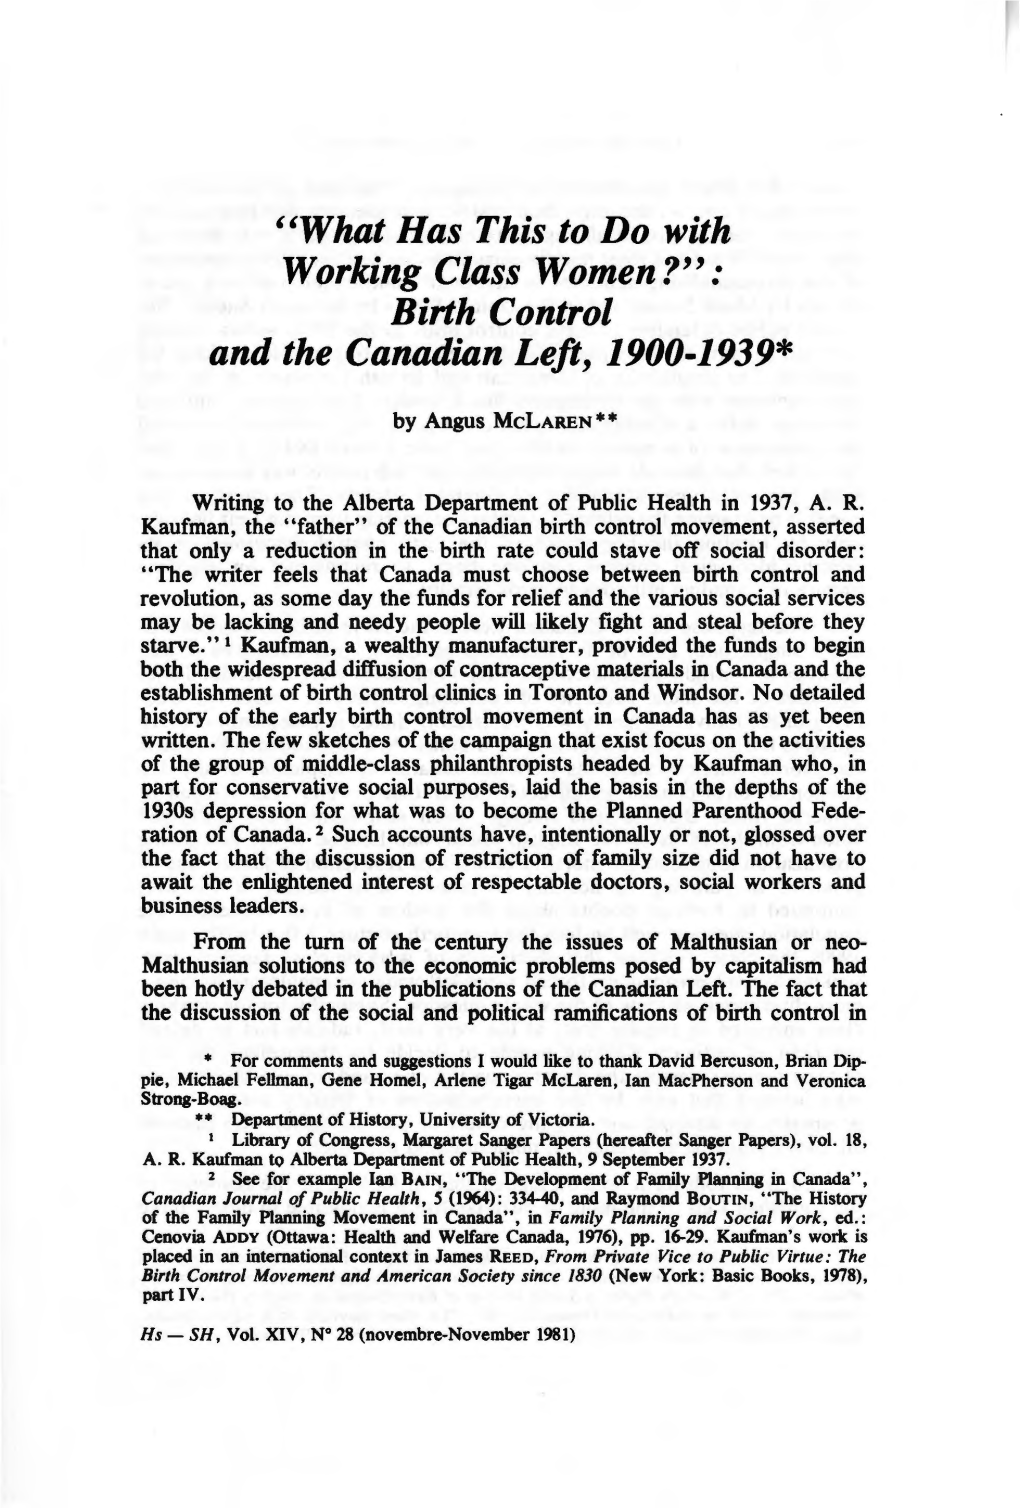 "What Has This to Do with Working Class Women?": Birth Control and the Canadian Left, 1900-1939*